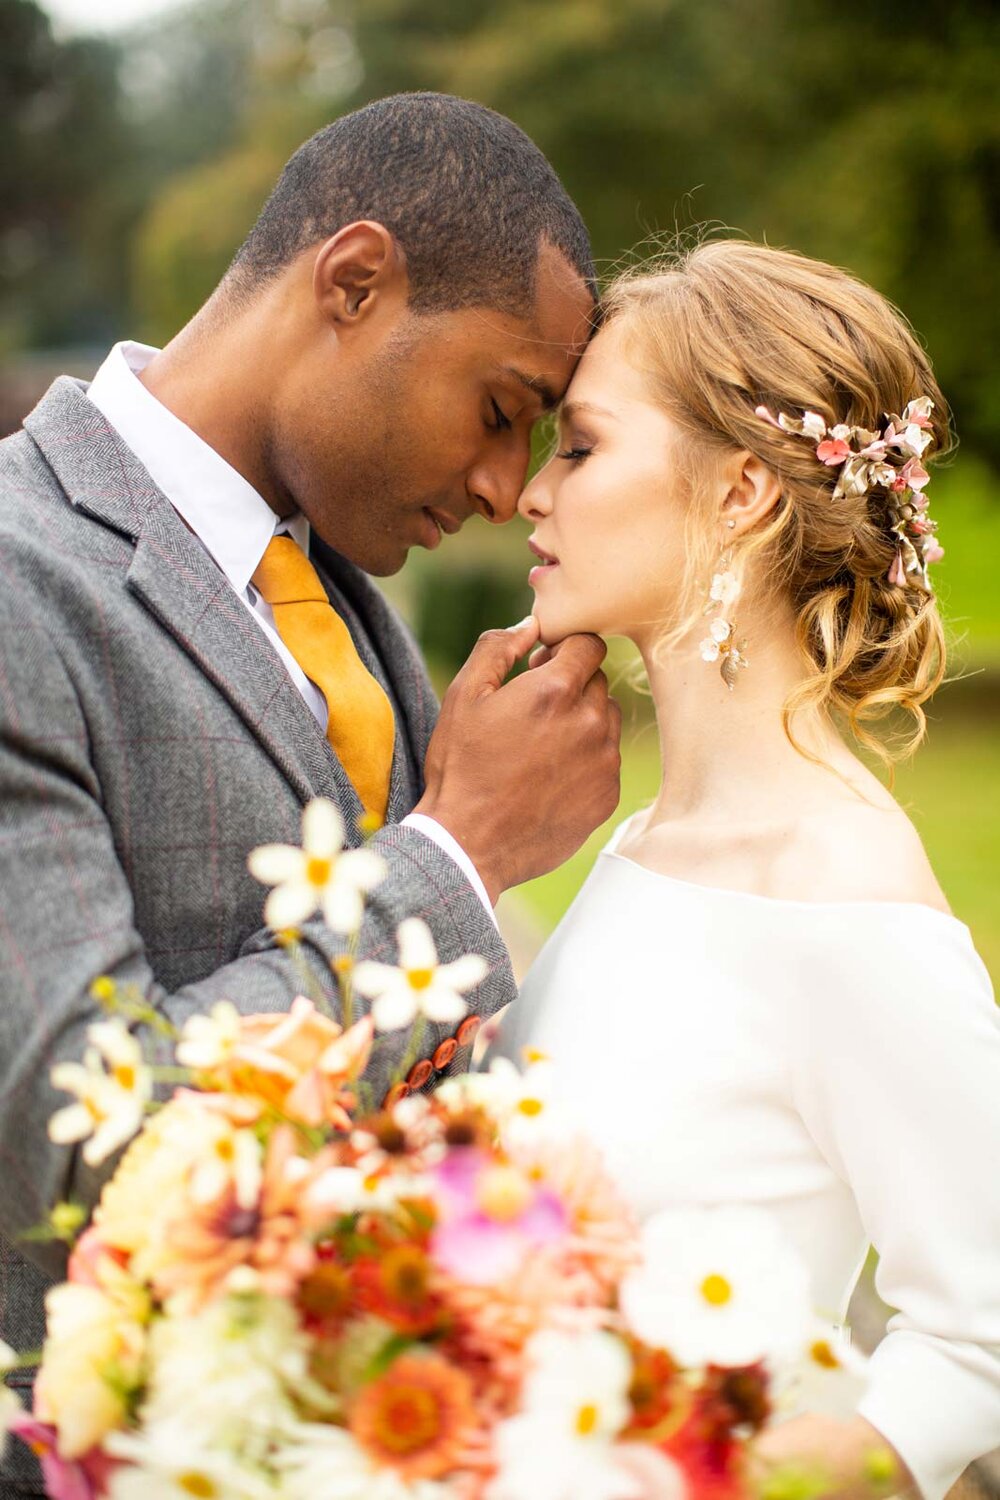 romantic-wedding-makeup-and-hair-by-storme-makeup-and-hair-wotton-house-dorking-surrey.jpg